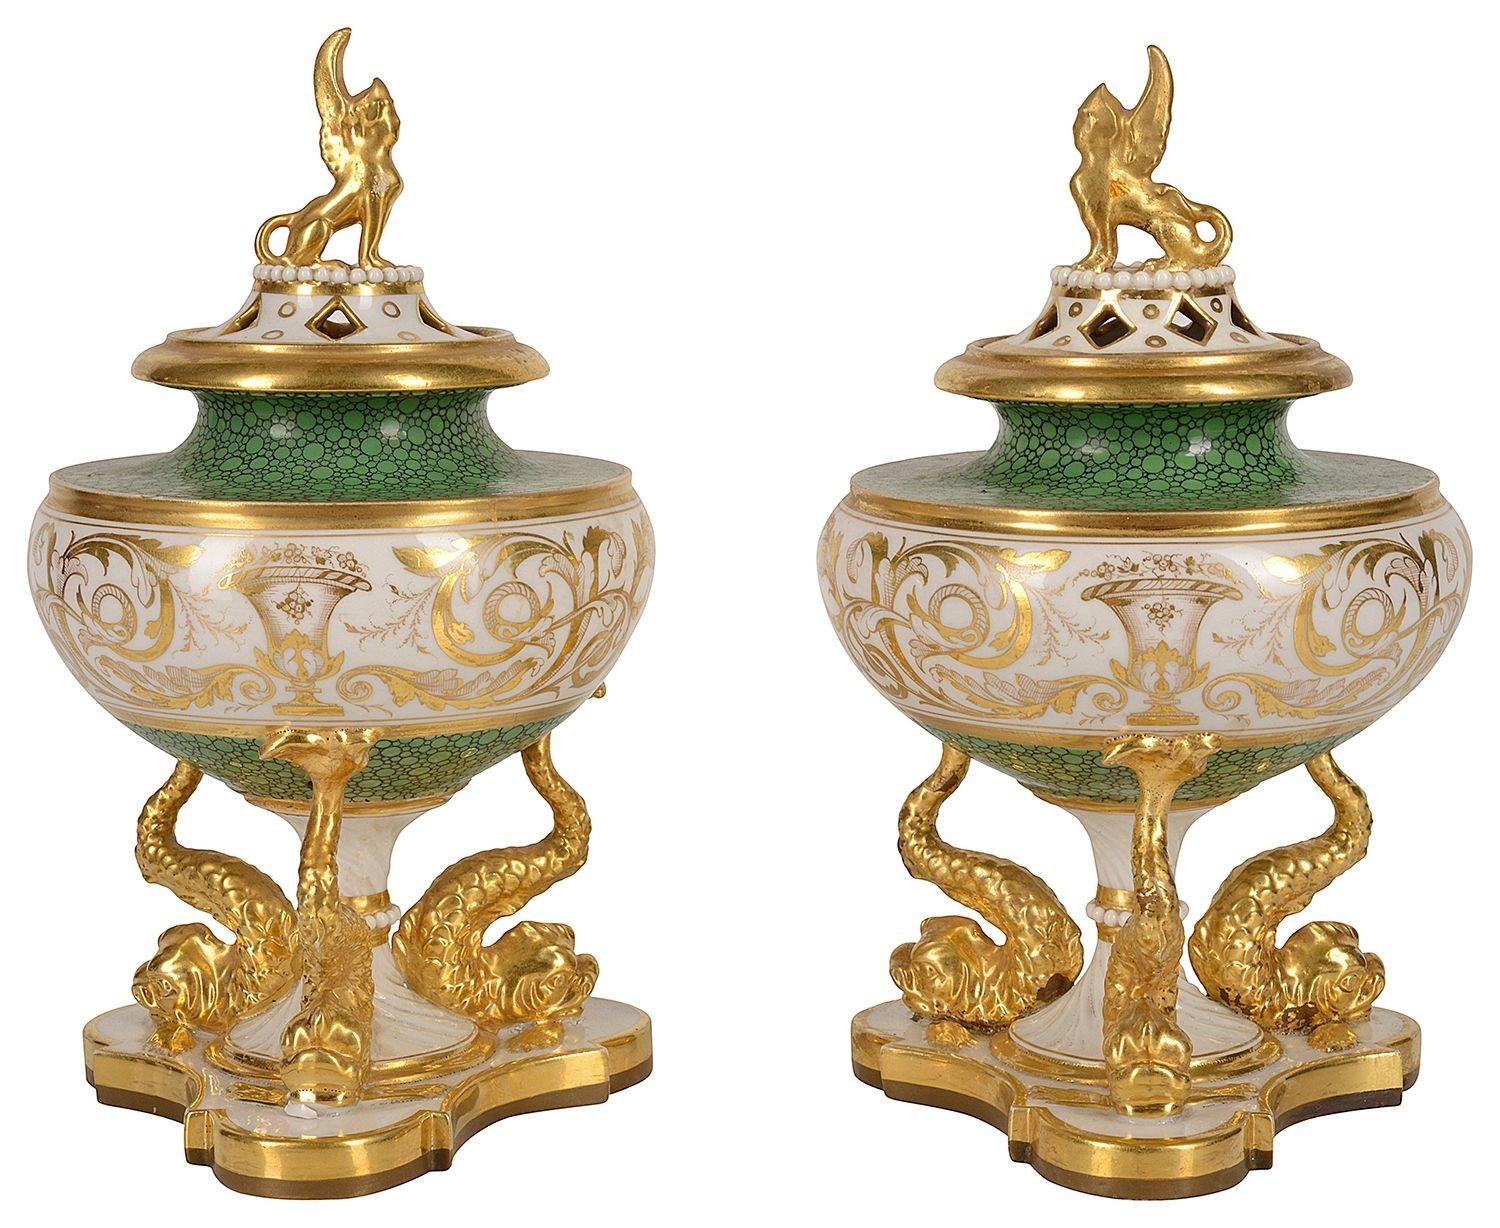 A fine and rare pair of early 19th century Royal Worcester, Flight Barr & Barr hand painted porcelain lidded urns. Each with this wonderful green ground, the pierced lids with gilded sphinks finials, classical scrolling decoration with inset scenes